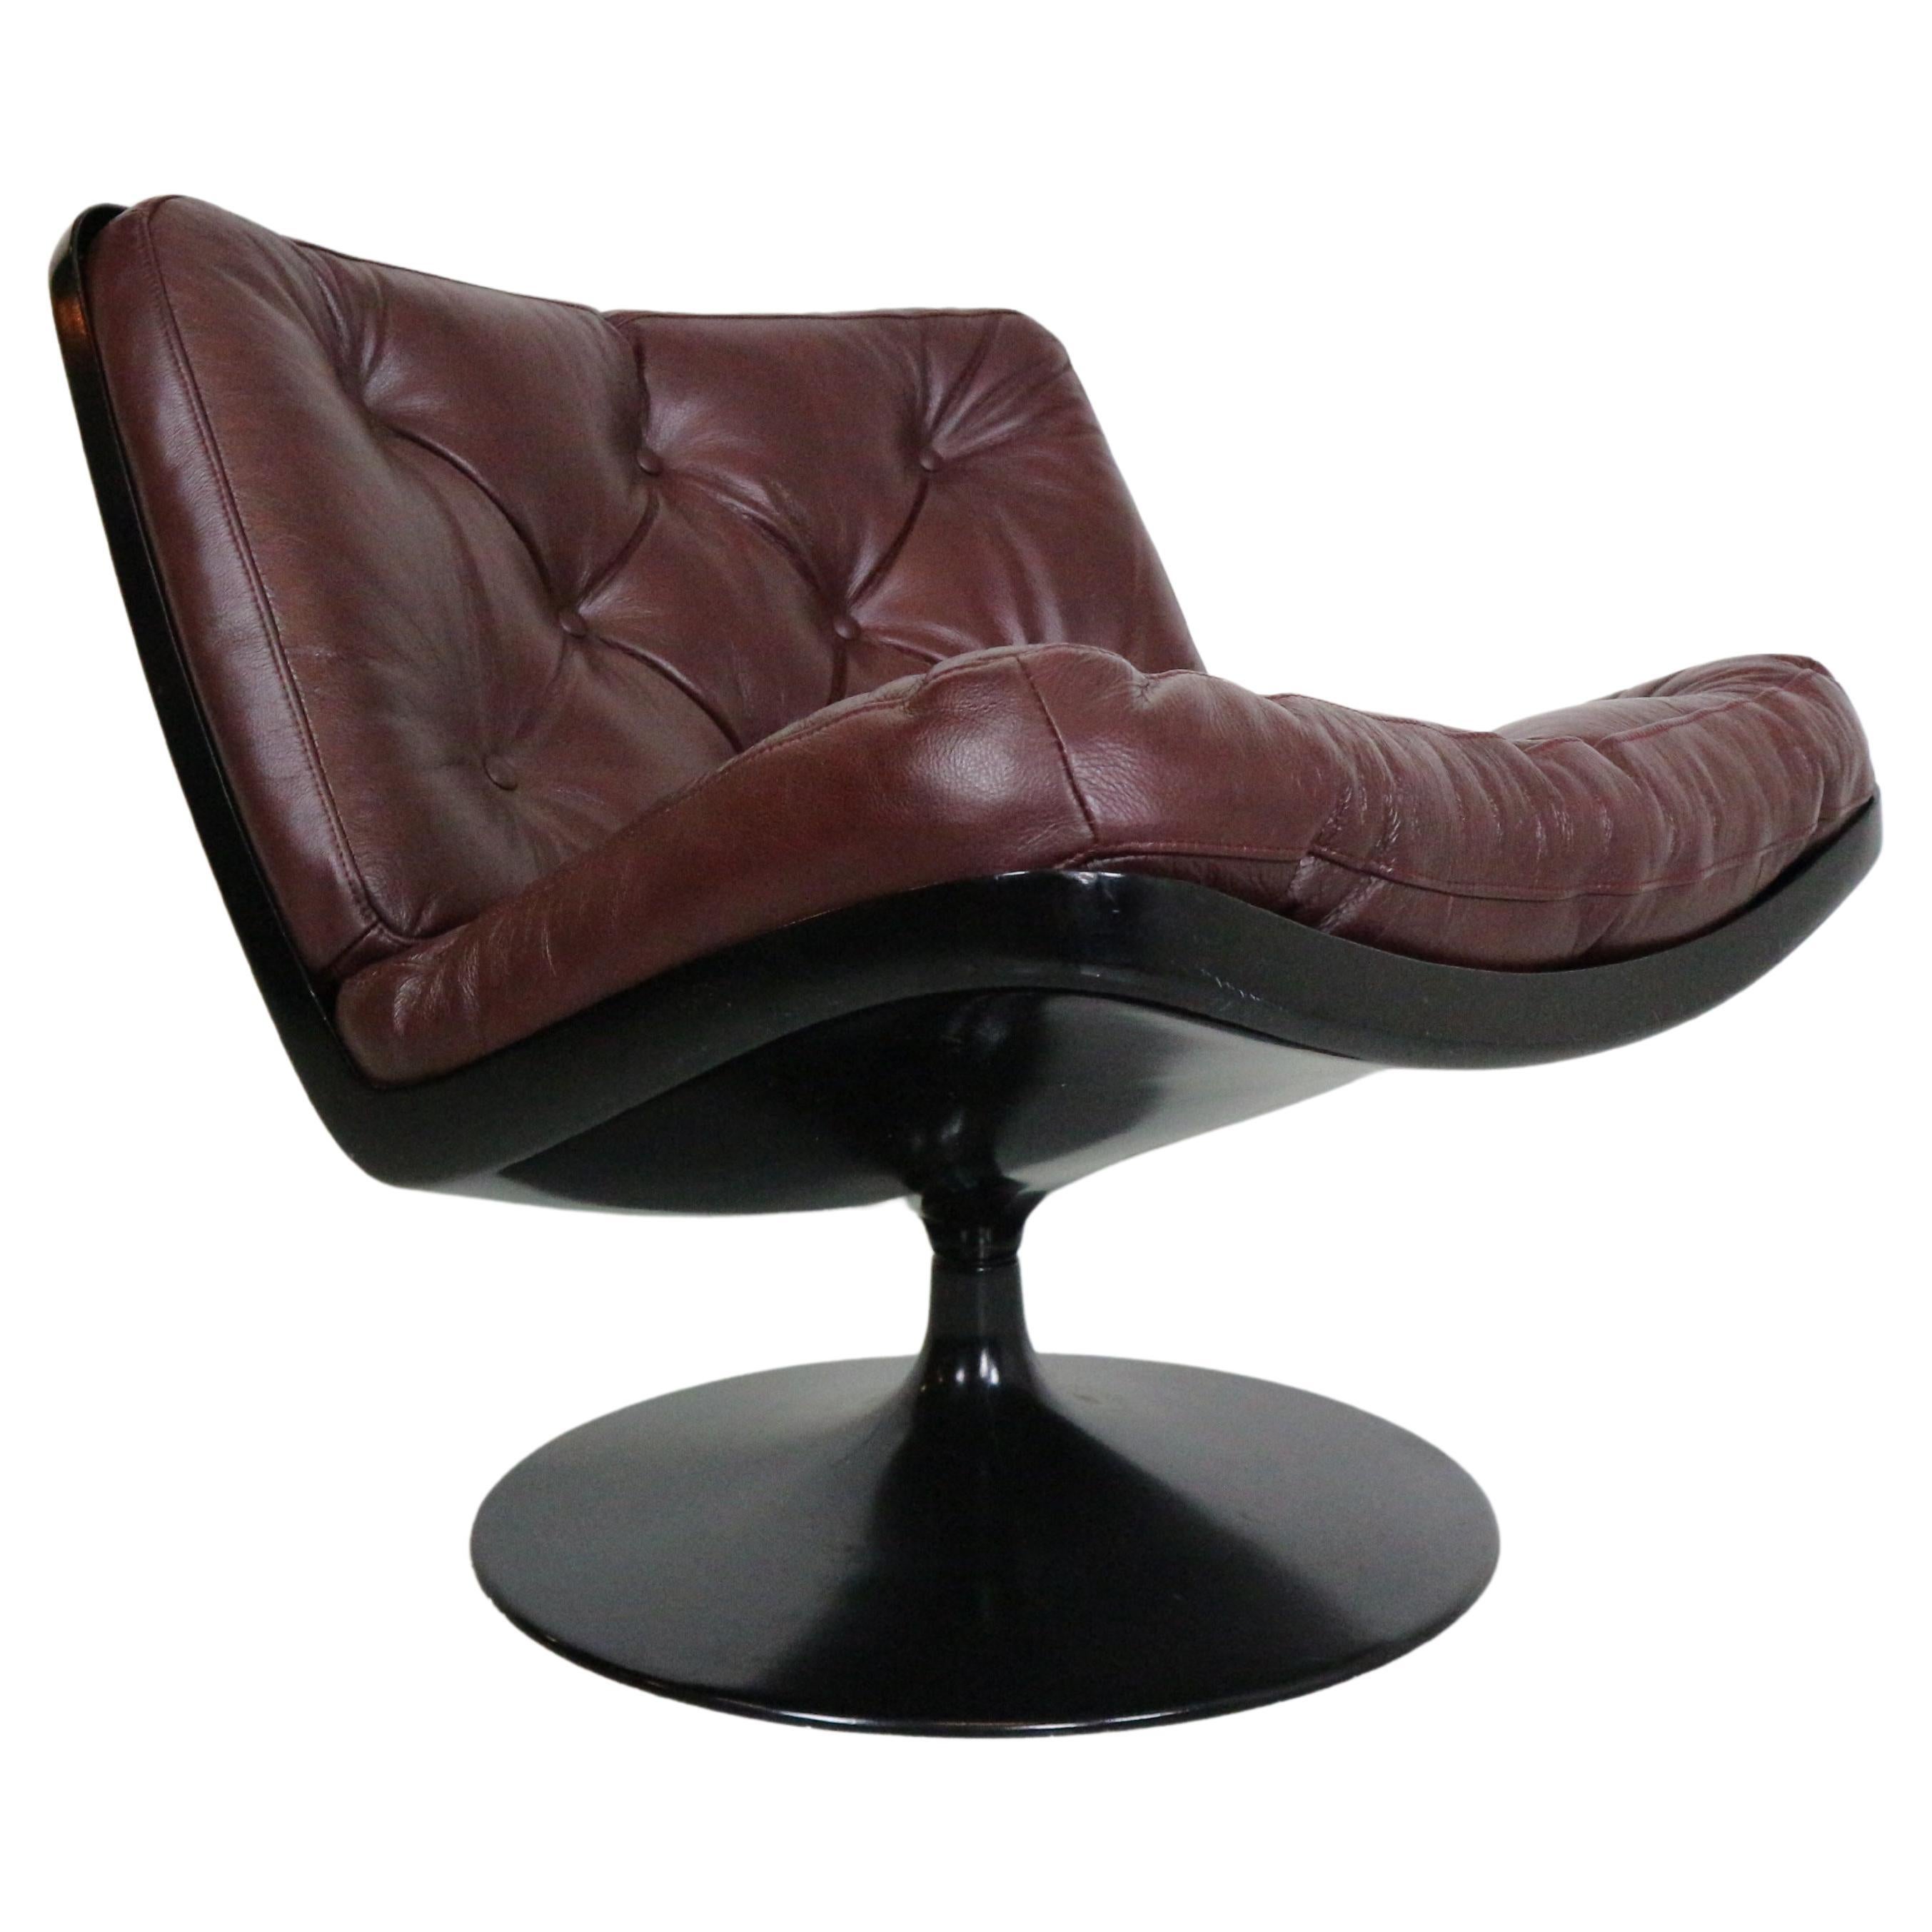 Geoffrey Harcourt Swivel Leather Lounge Chair- "F504" for Artifort, 1960's For Sale